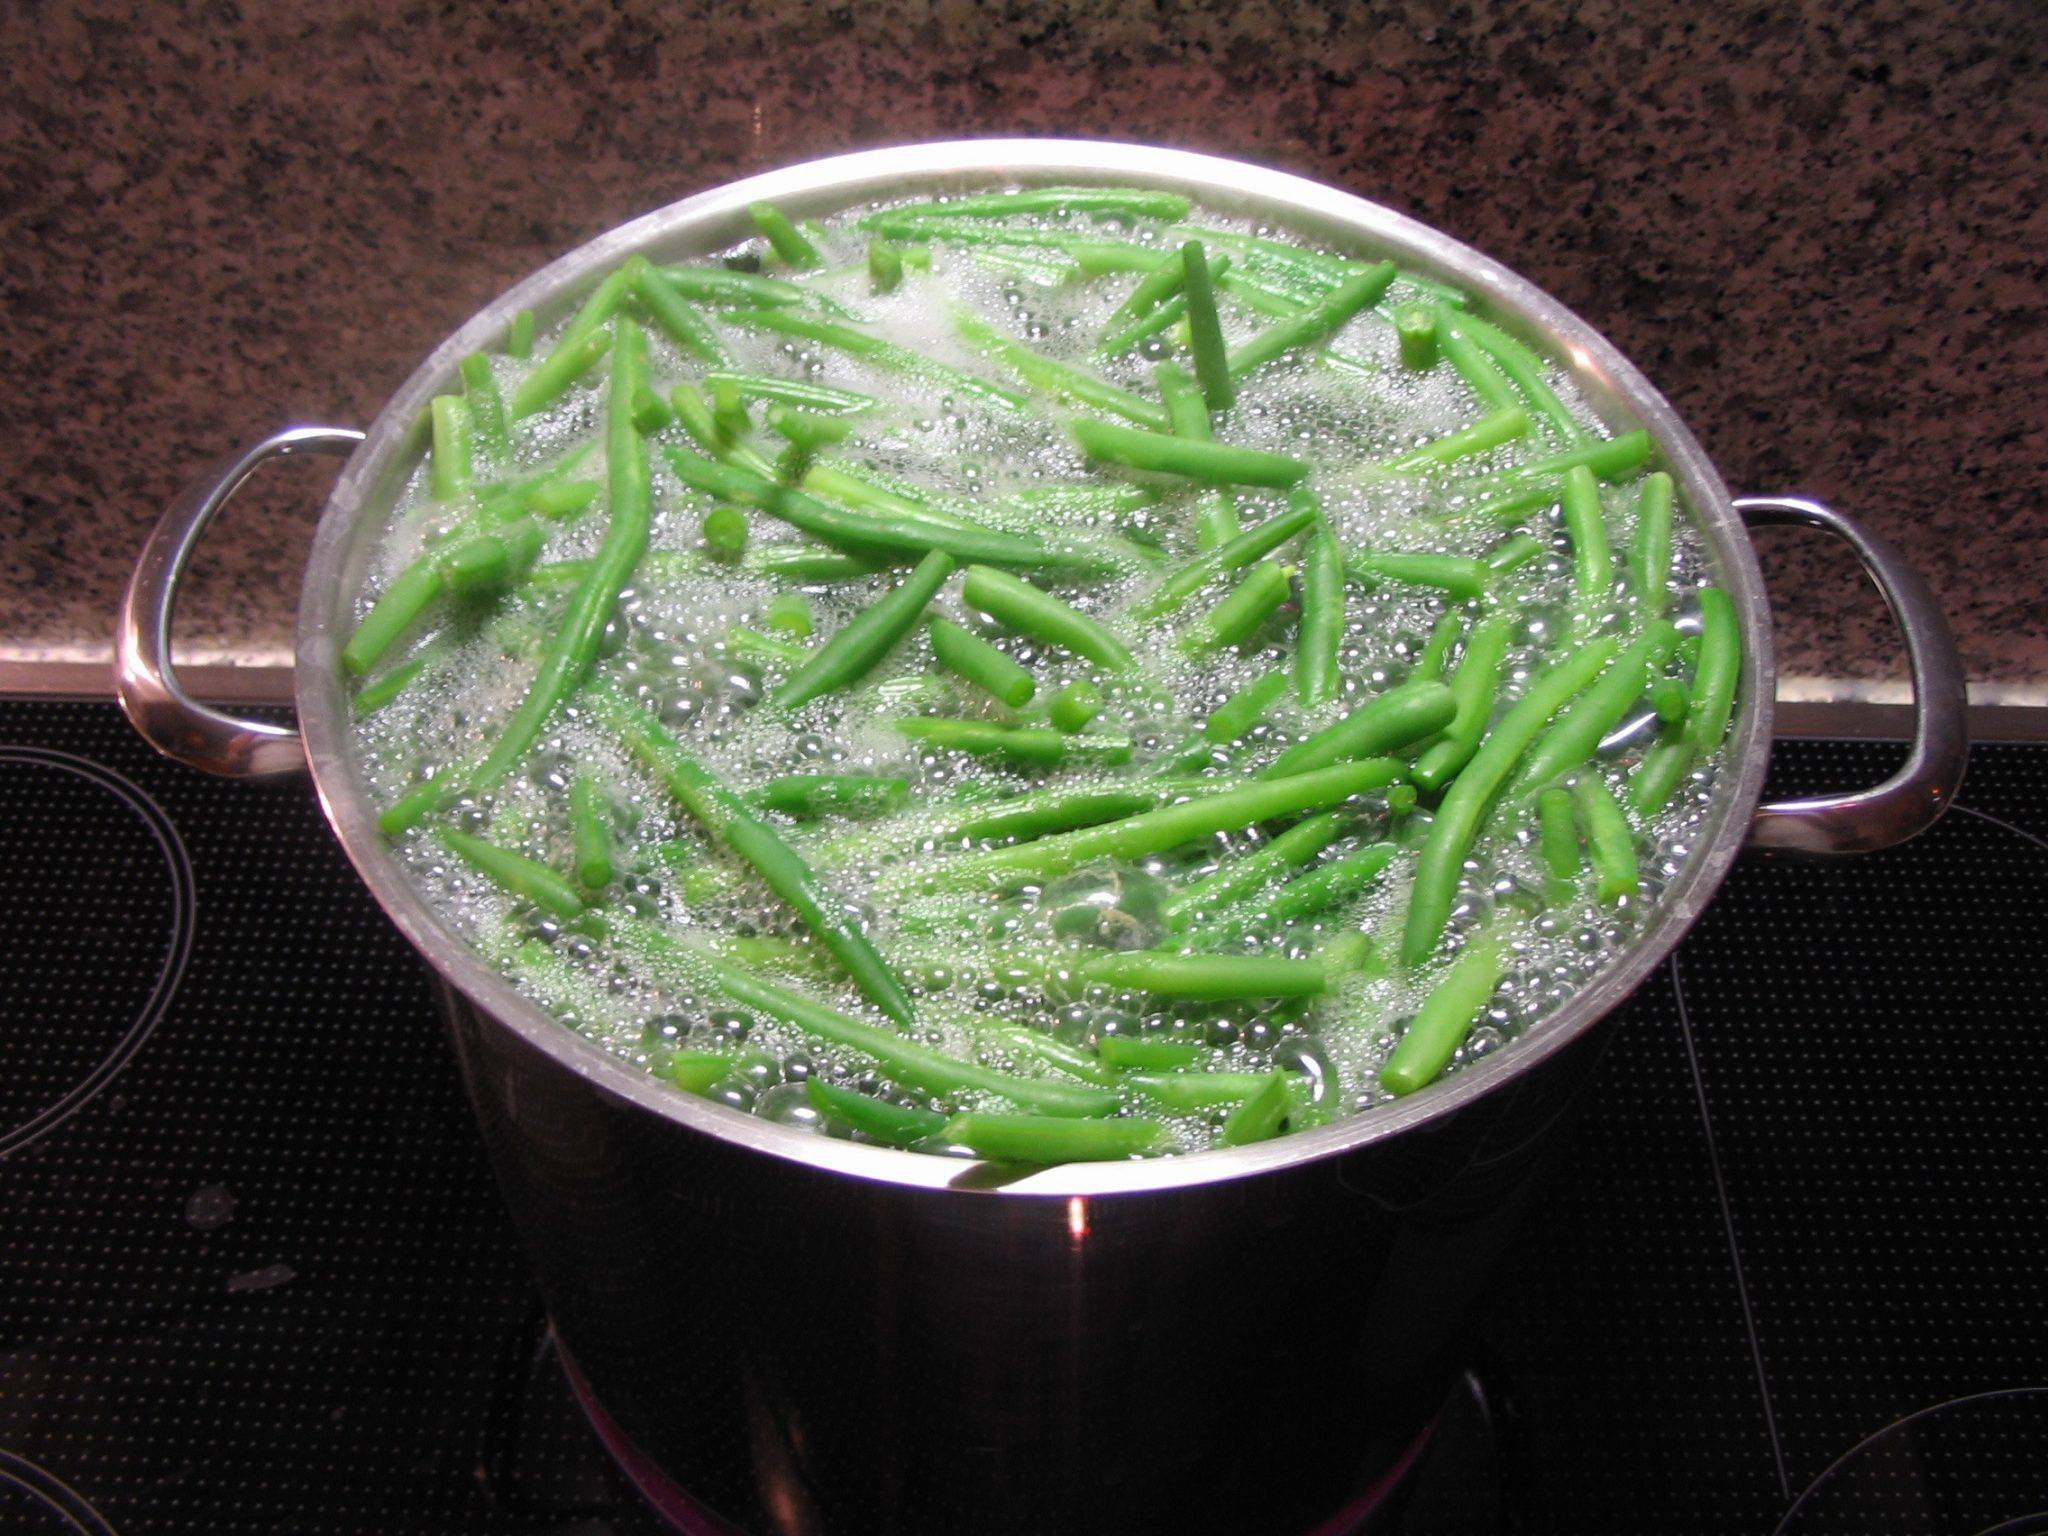 About Blanching